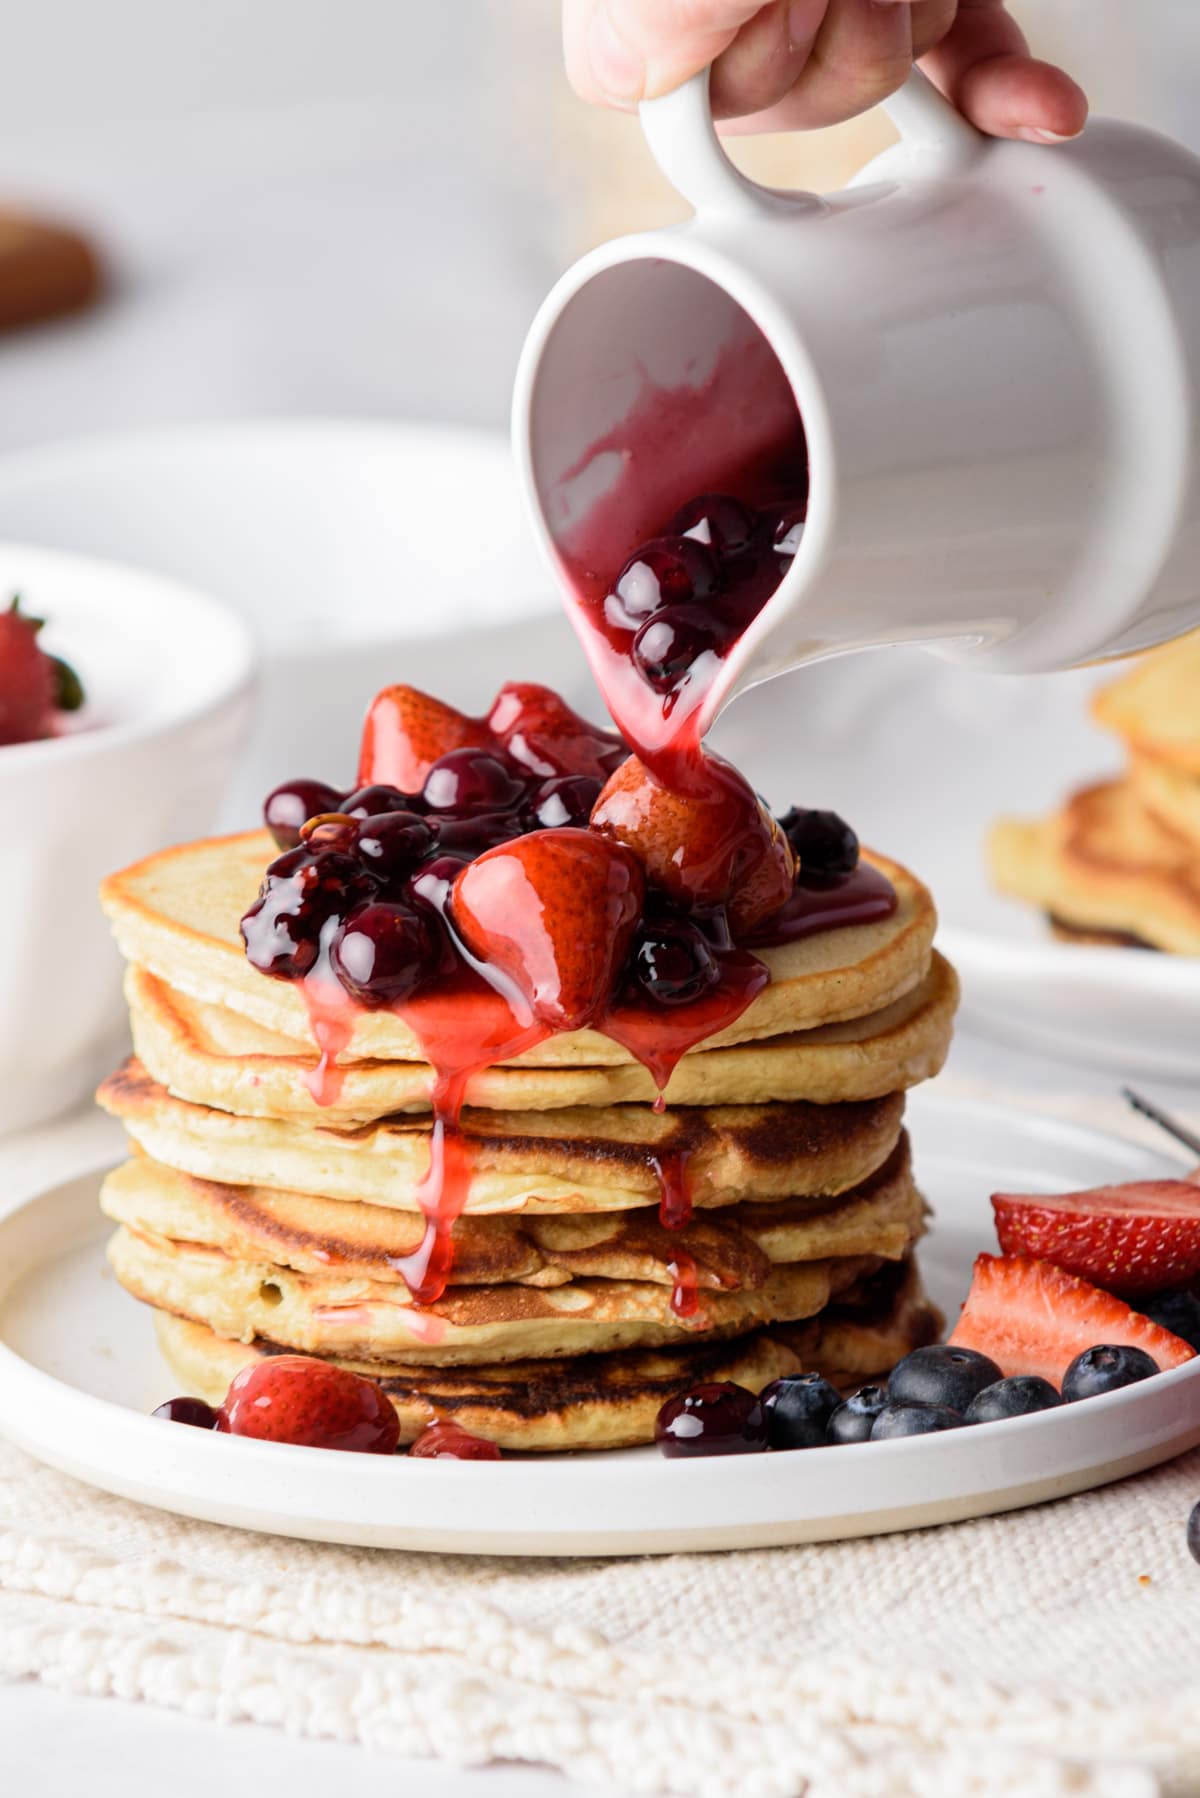 Berry syrup being poured over pancakes